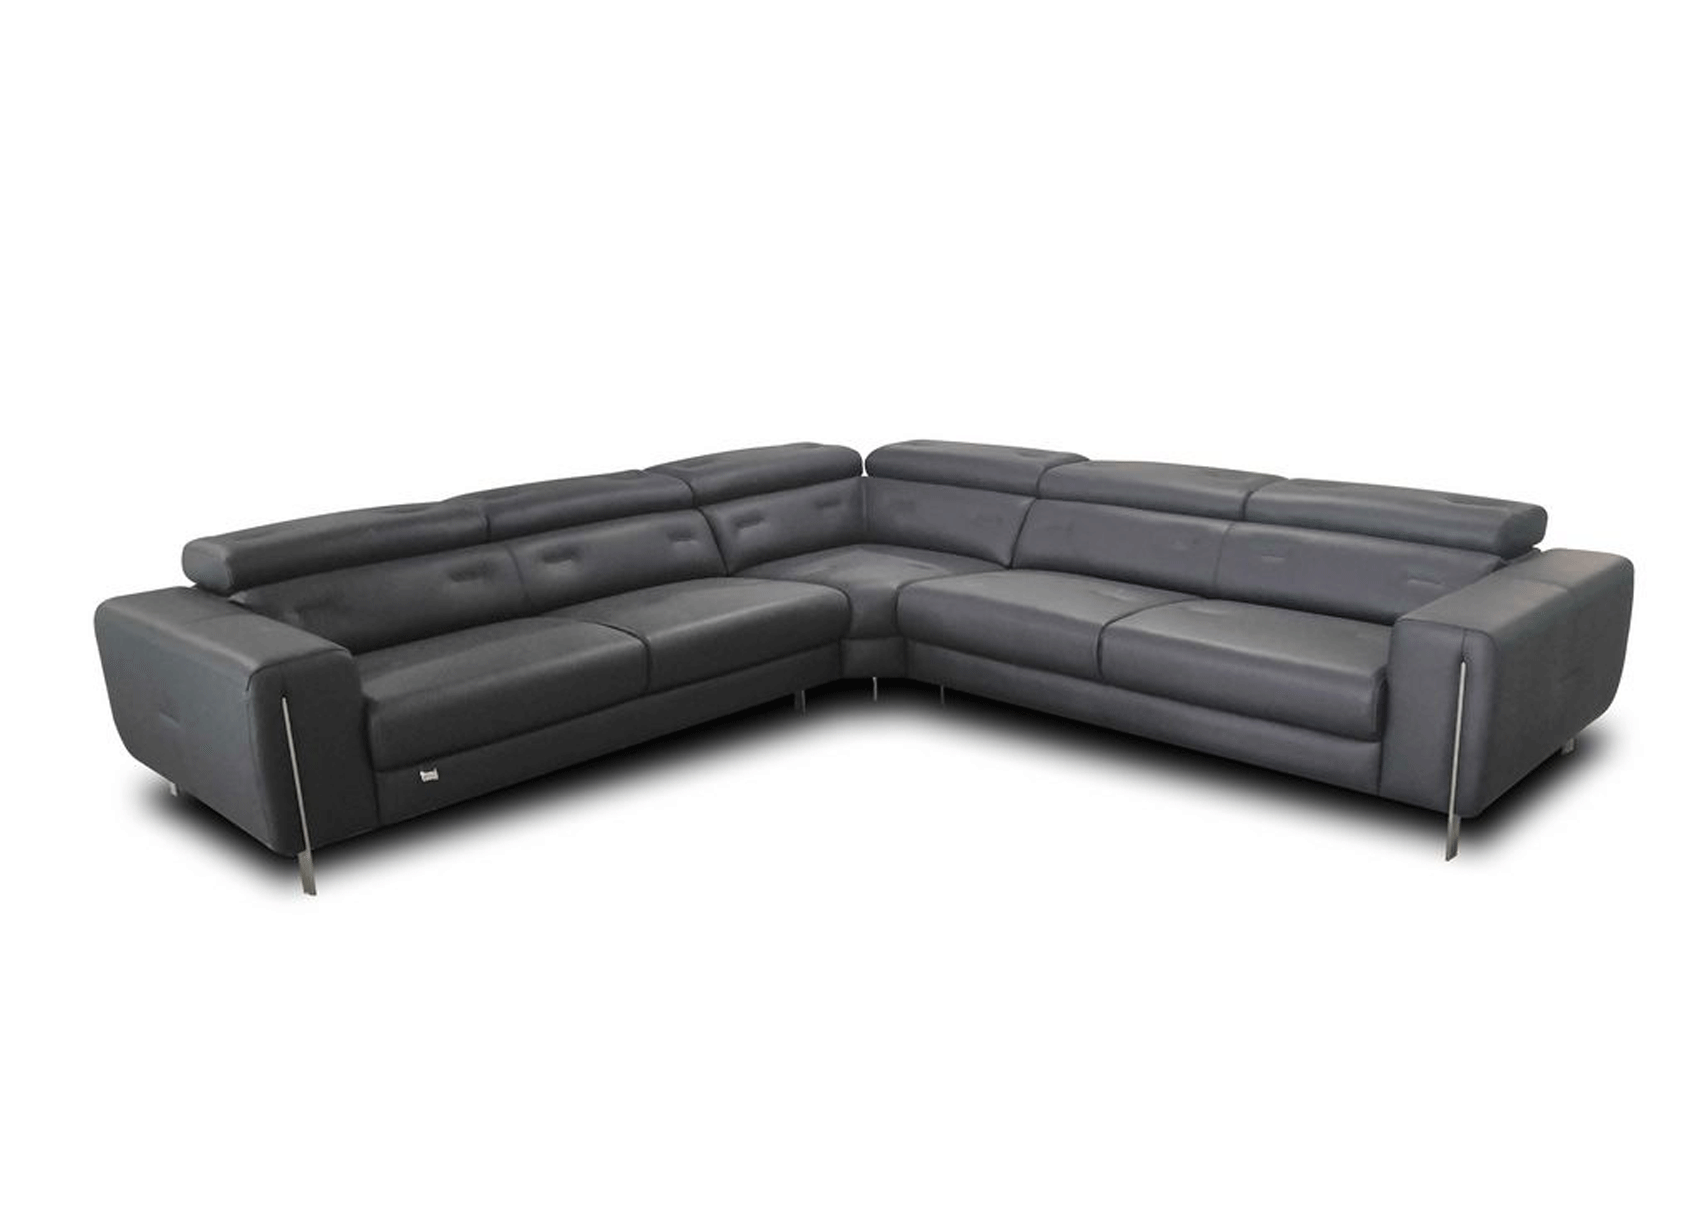 Brands ALF Capri Coffee Tables, Italy 795 Sectional